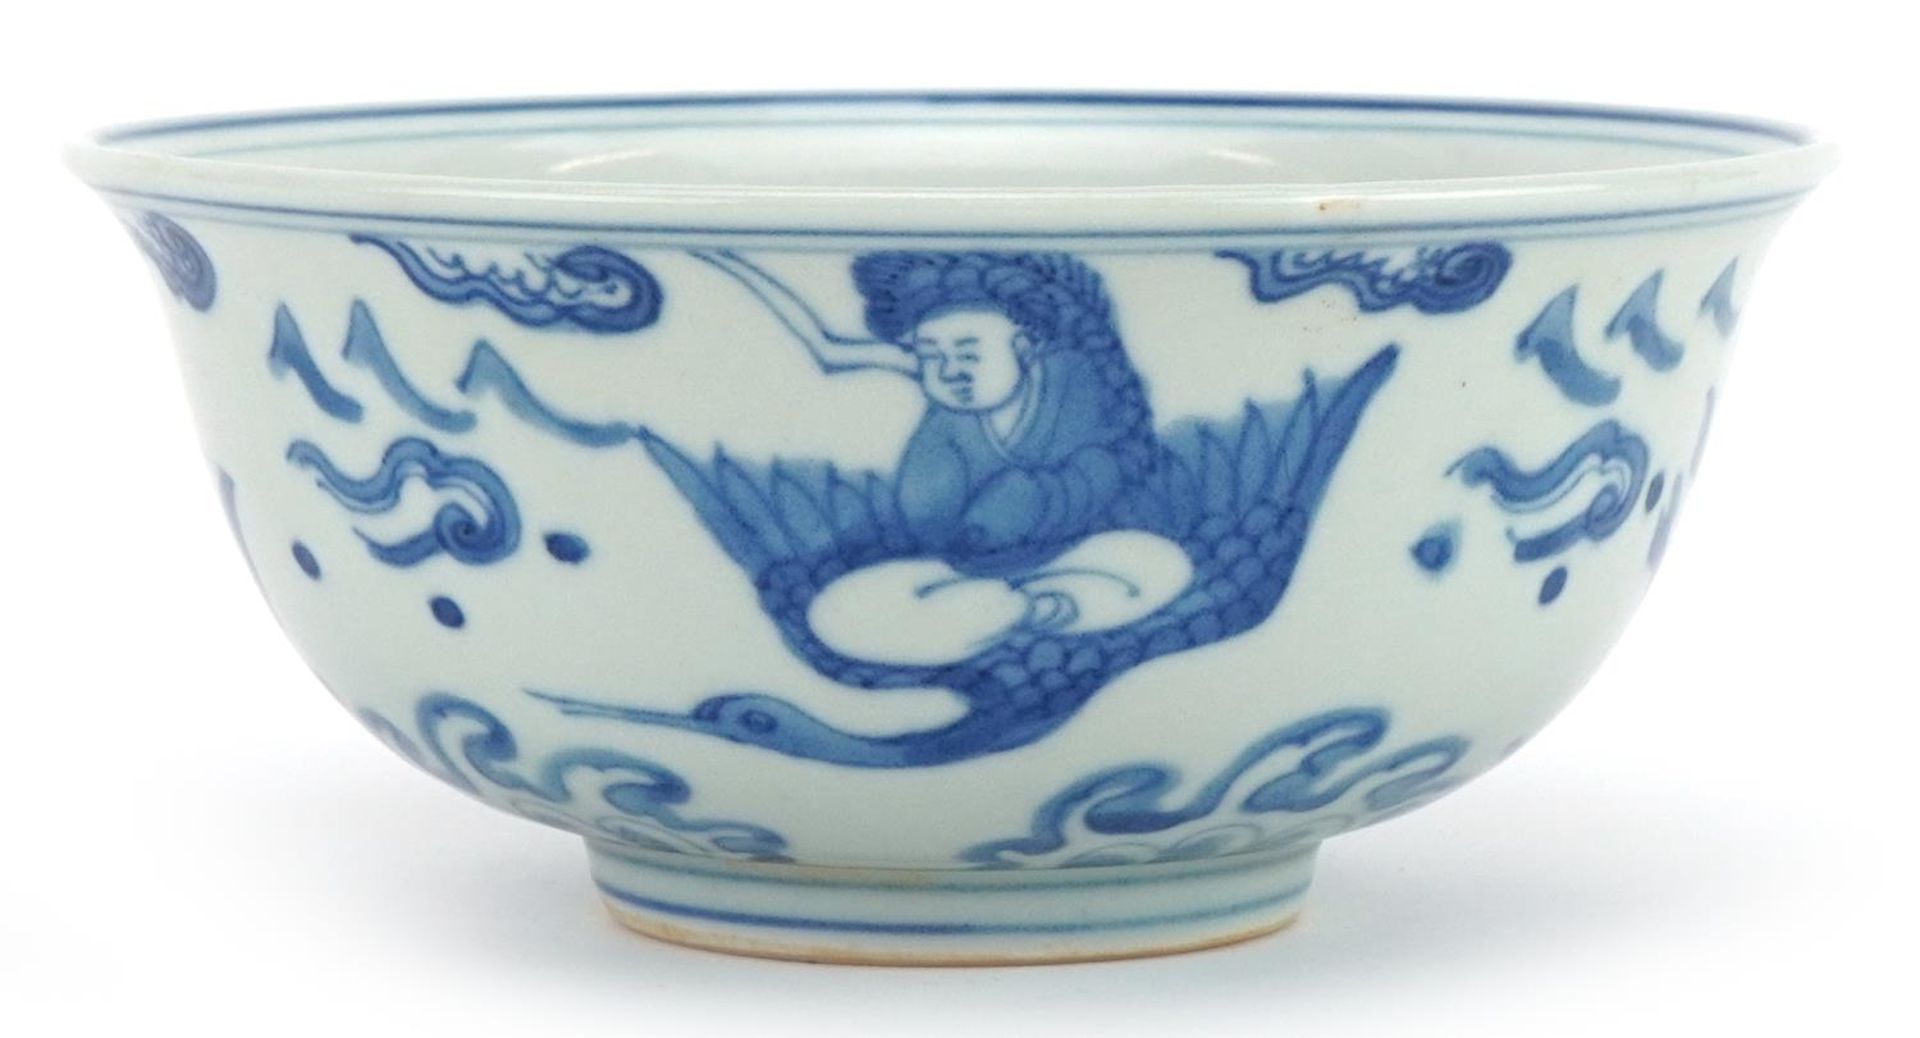 Chinese blue and white porcelain bowl hand painted with figures and animals above crashing waves,